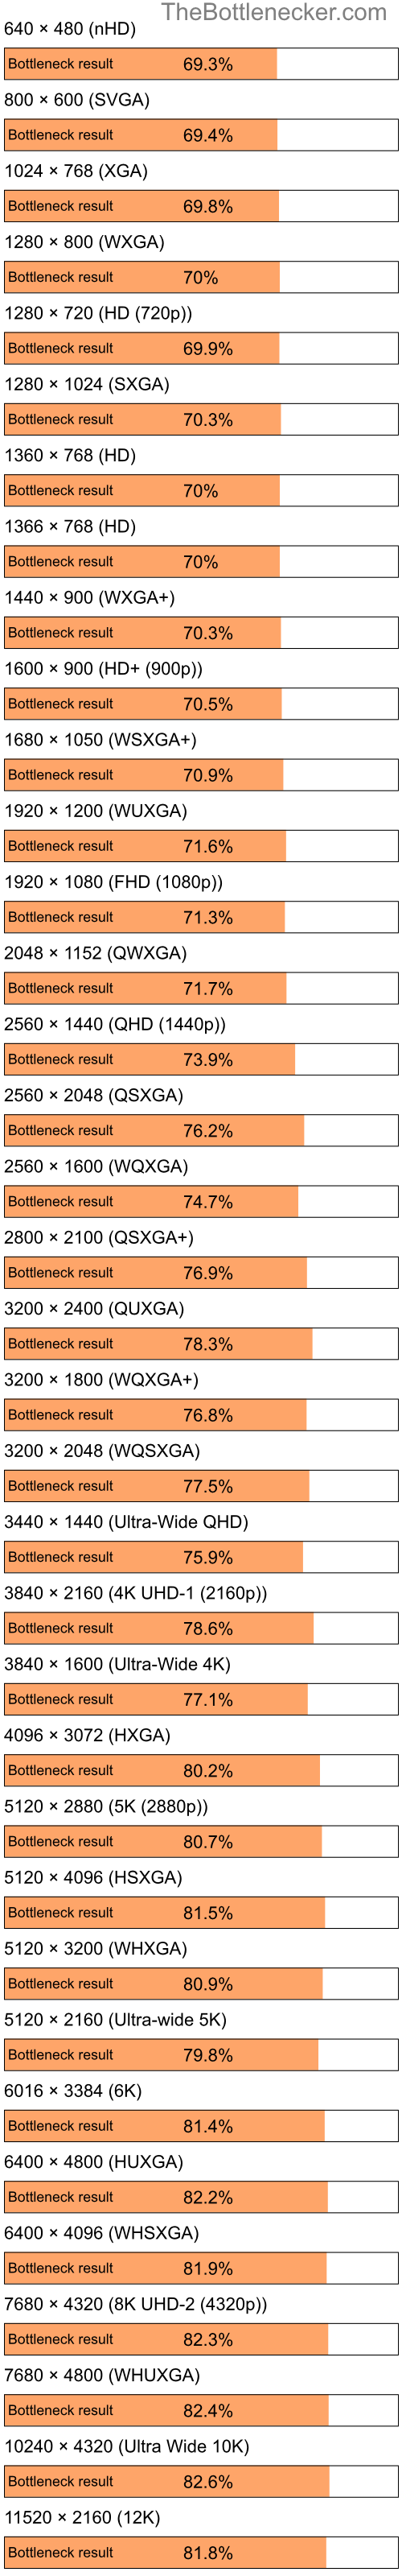 Bottleneck results by resolution for Intel Celeron M 410 and AMD Mobility Radeon HD 2400 XT in Graphic Card Intense Tasks